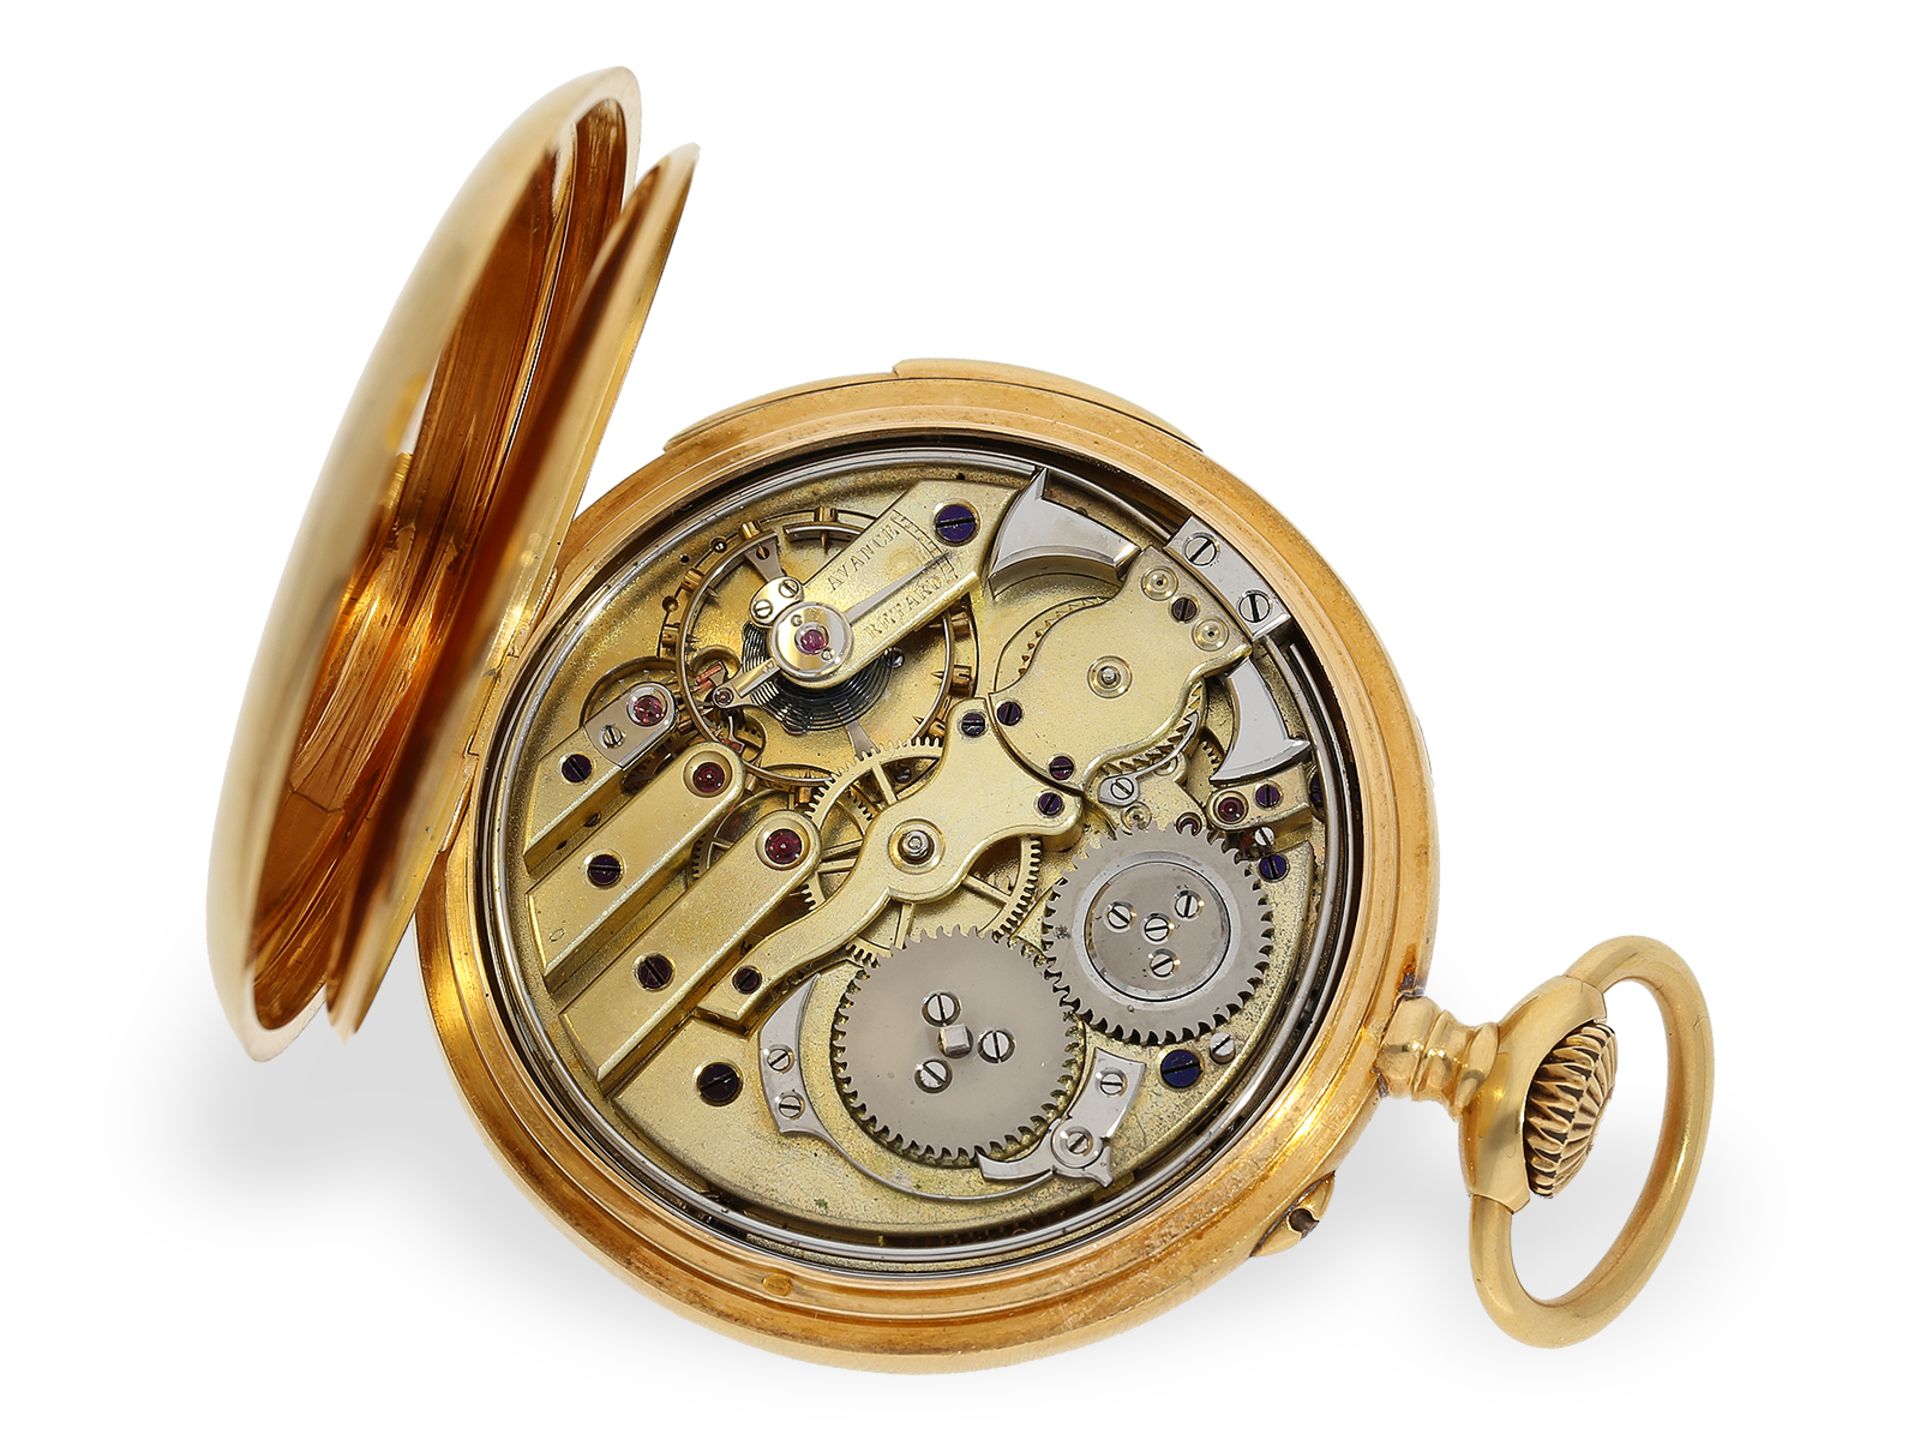 Fine 18K precision pocket watch with quarter repeater, probably Le Coultre, ca. 1900 - Image 2 of 5